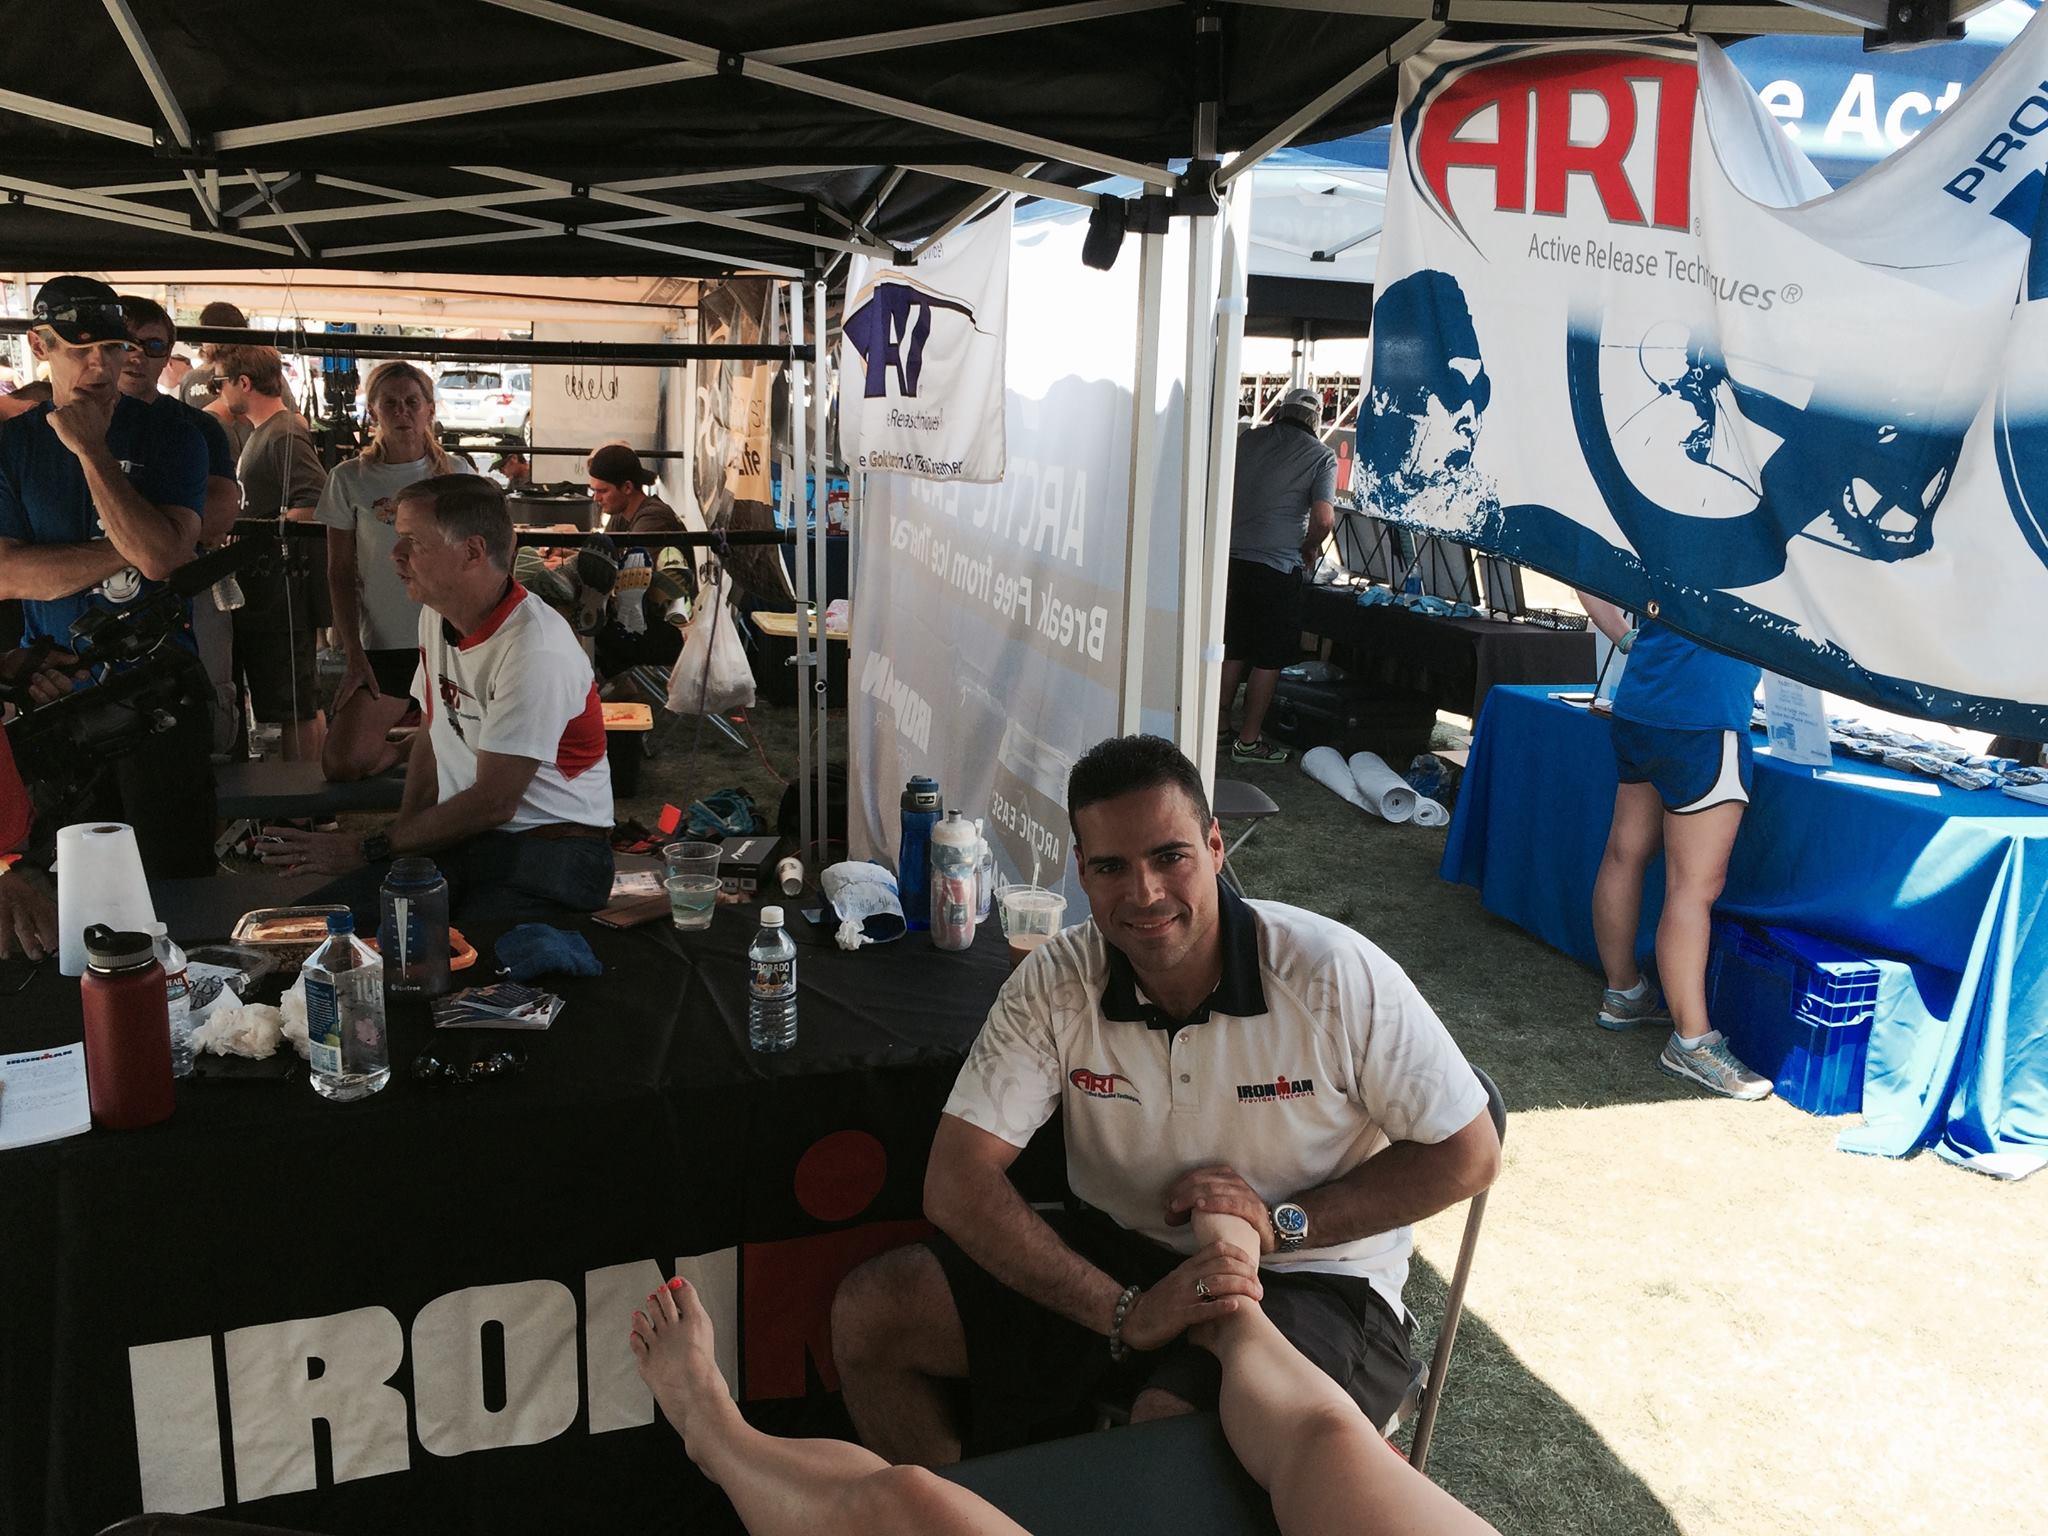 Treating Iron Man Competitors. Maximize Life Chiropractic Denver (303)922-8146